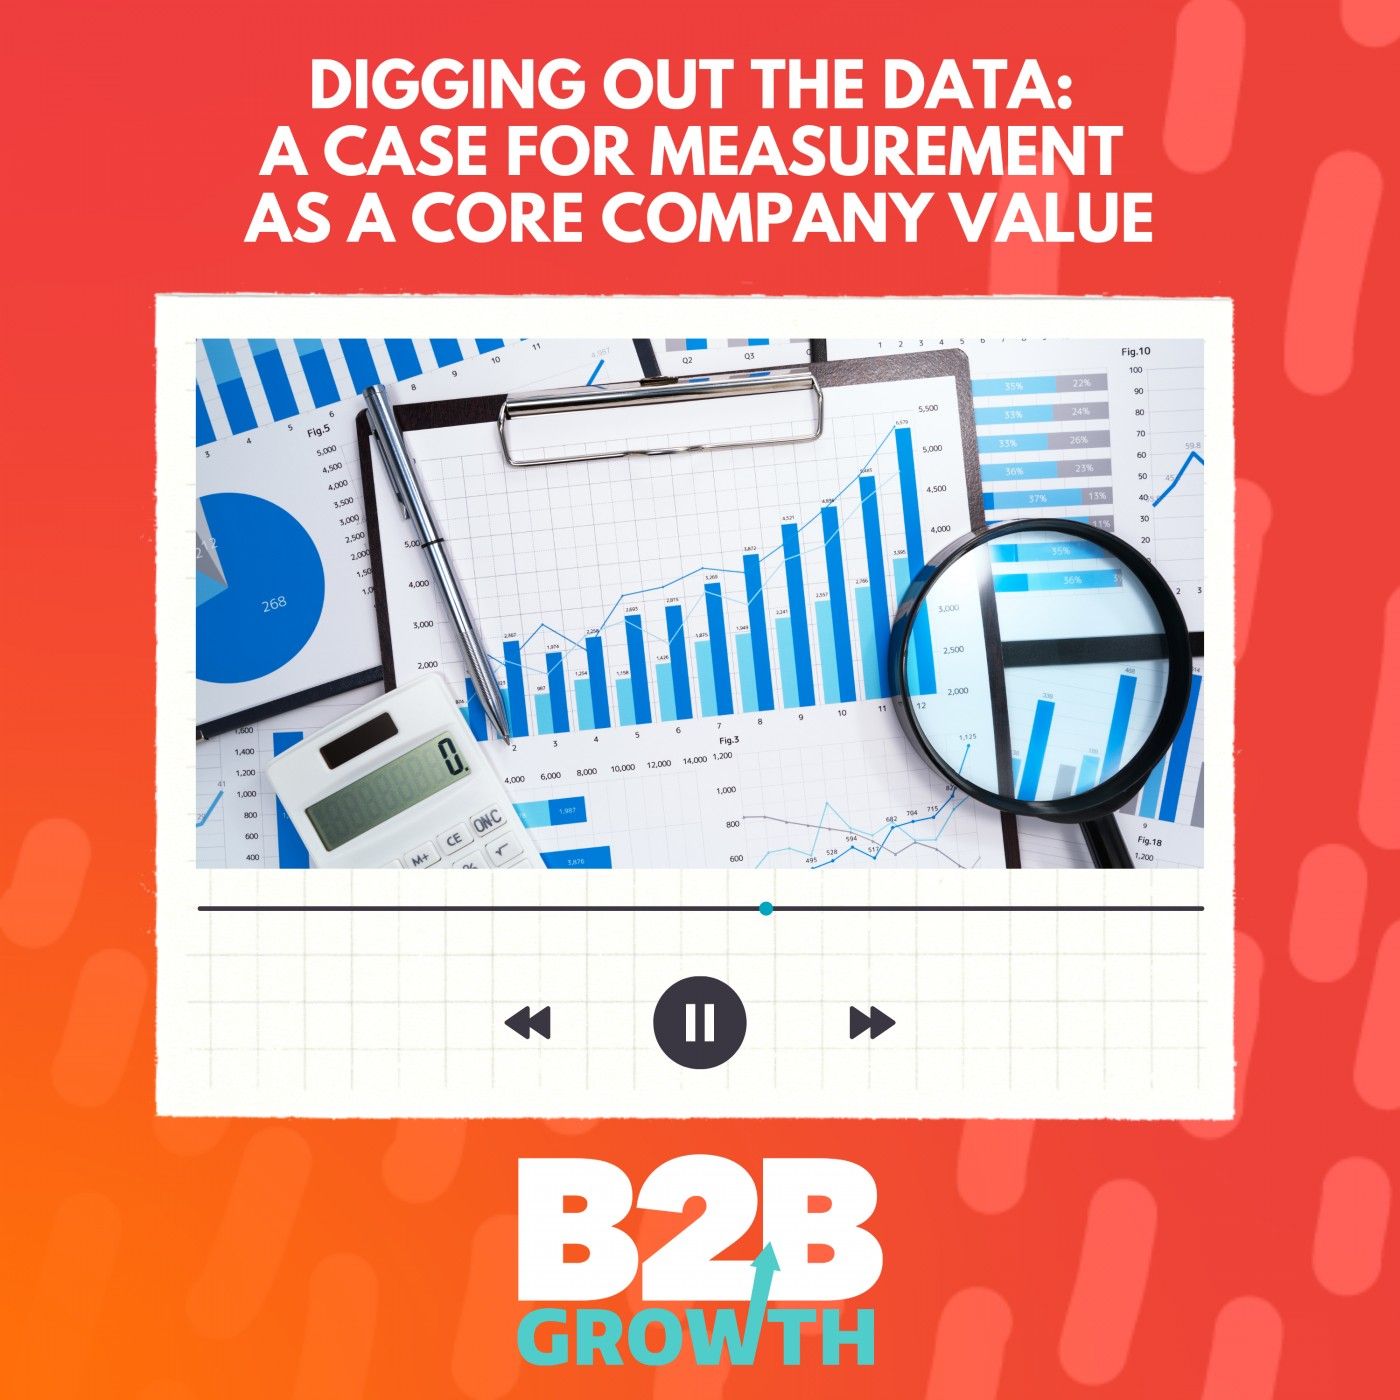 Digging Out the Data: A Case for Measurement as a Core Company Value